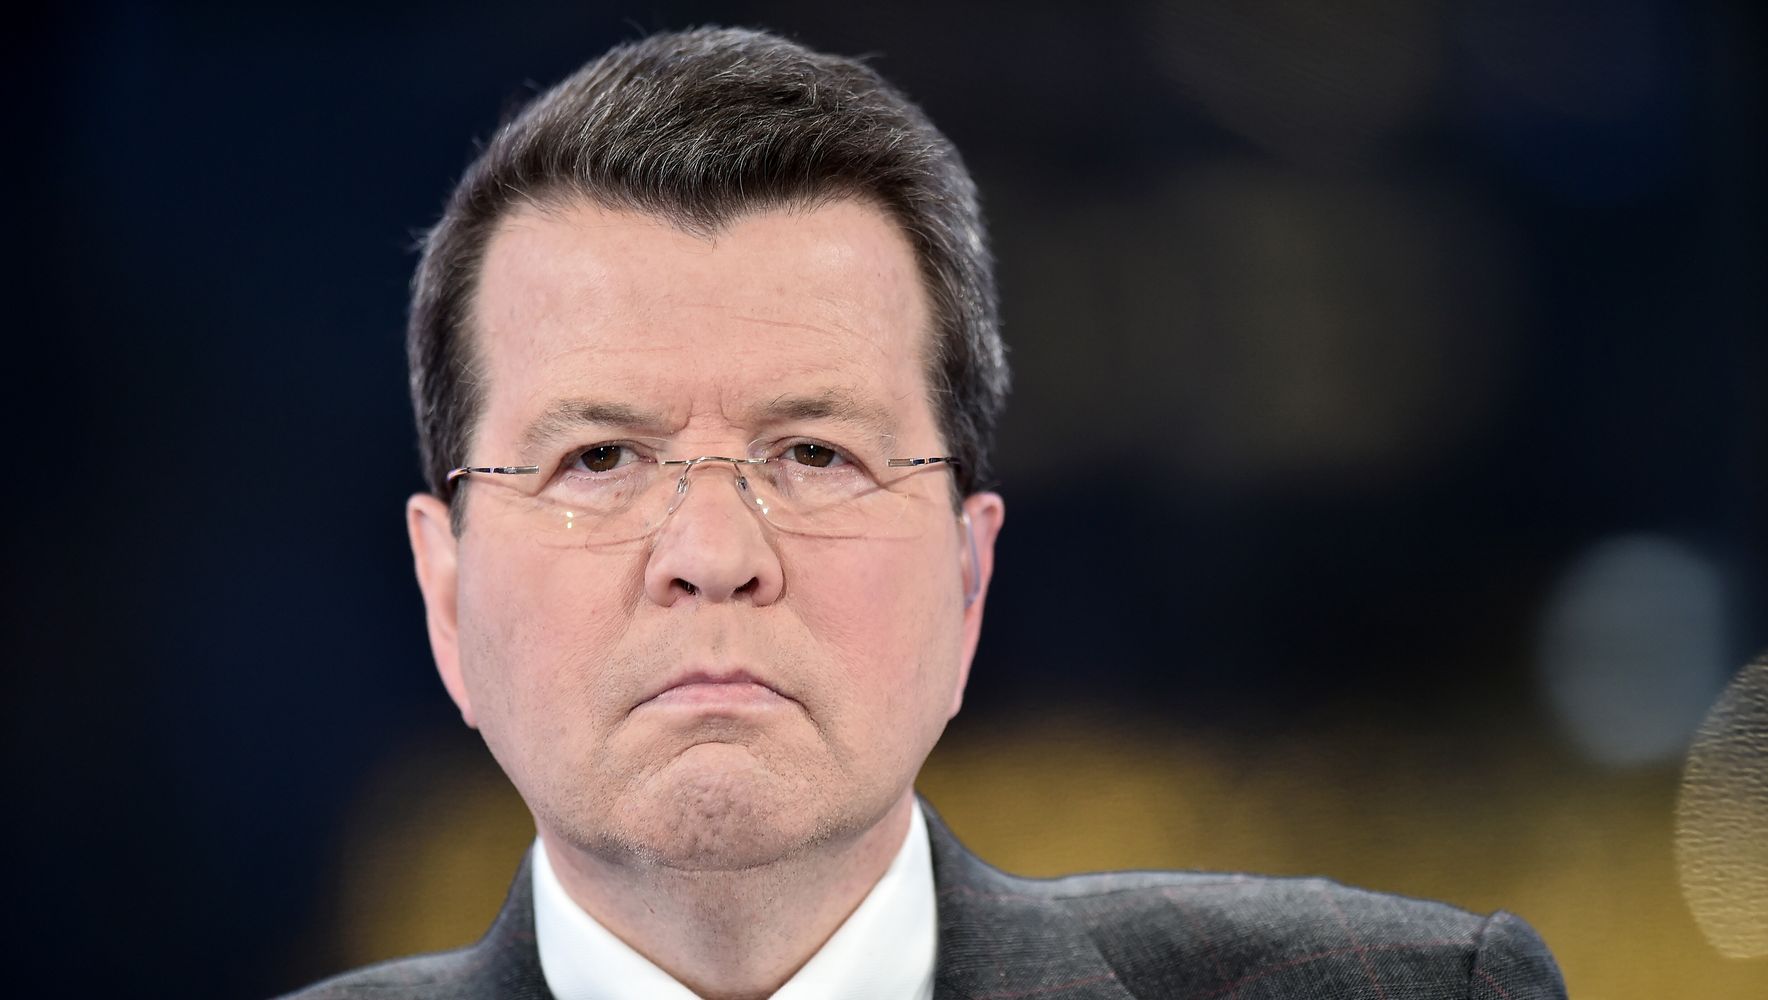 Fox Anchor Neil Cavuto Urges Vaccinations After Testing Positive For COVID-19